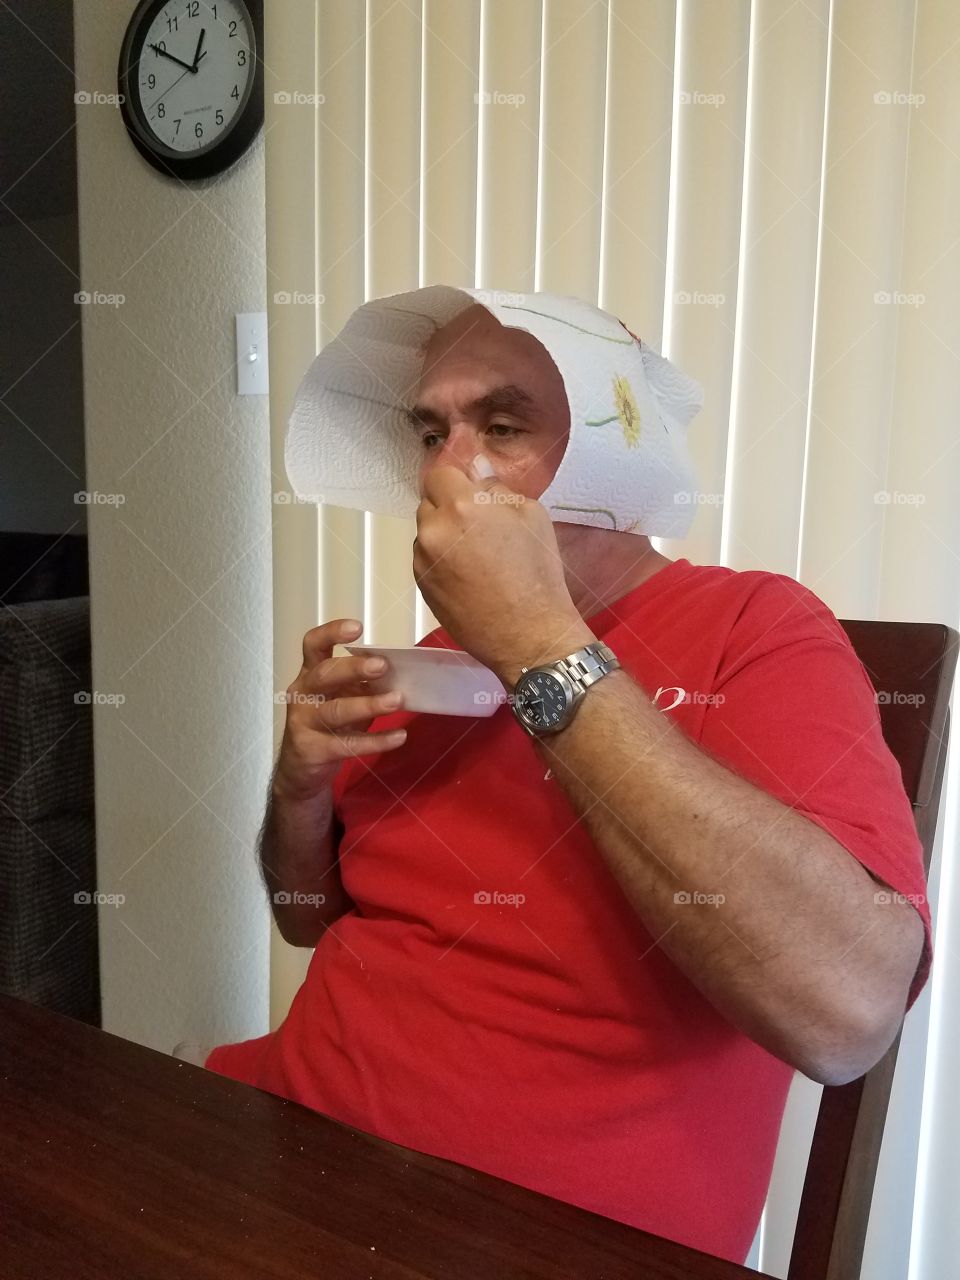 Silly man with napkin on his head